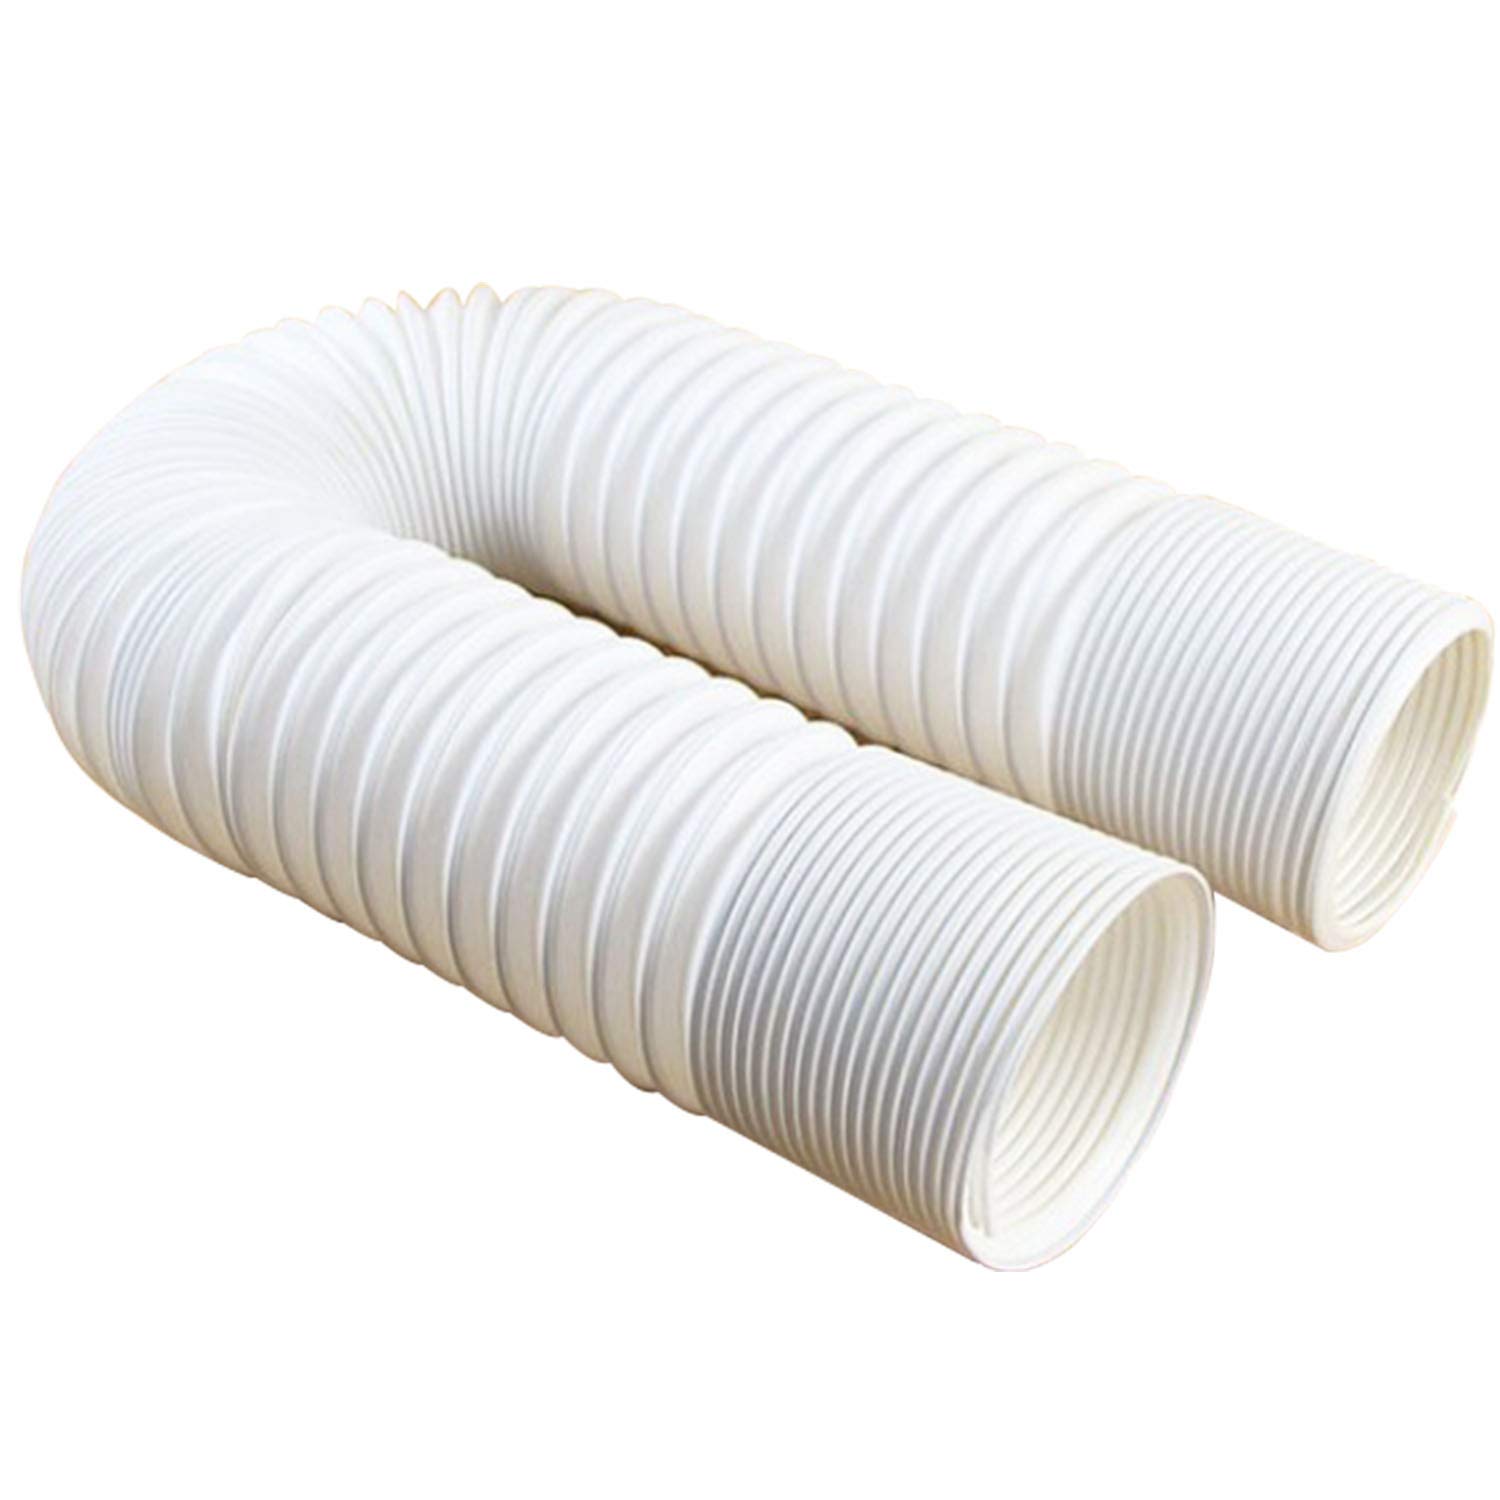 exhaust hose extension for portable air conditioner